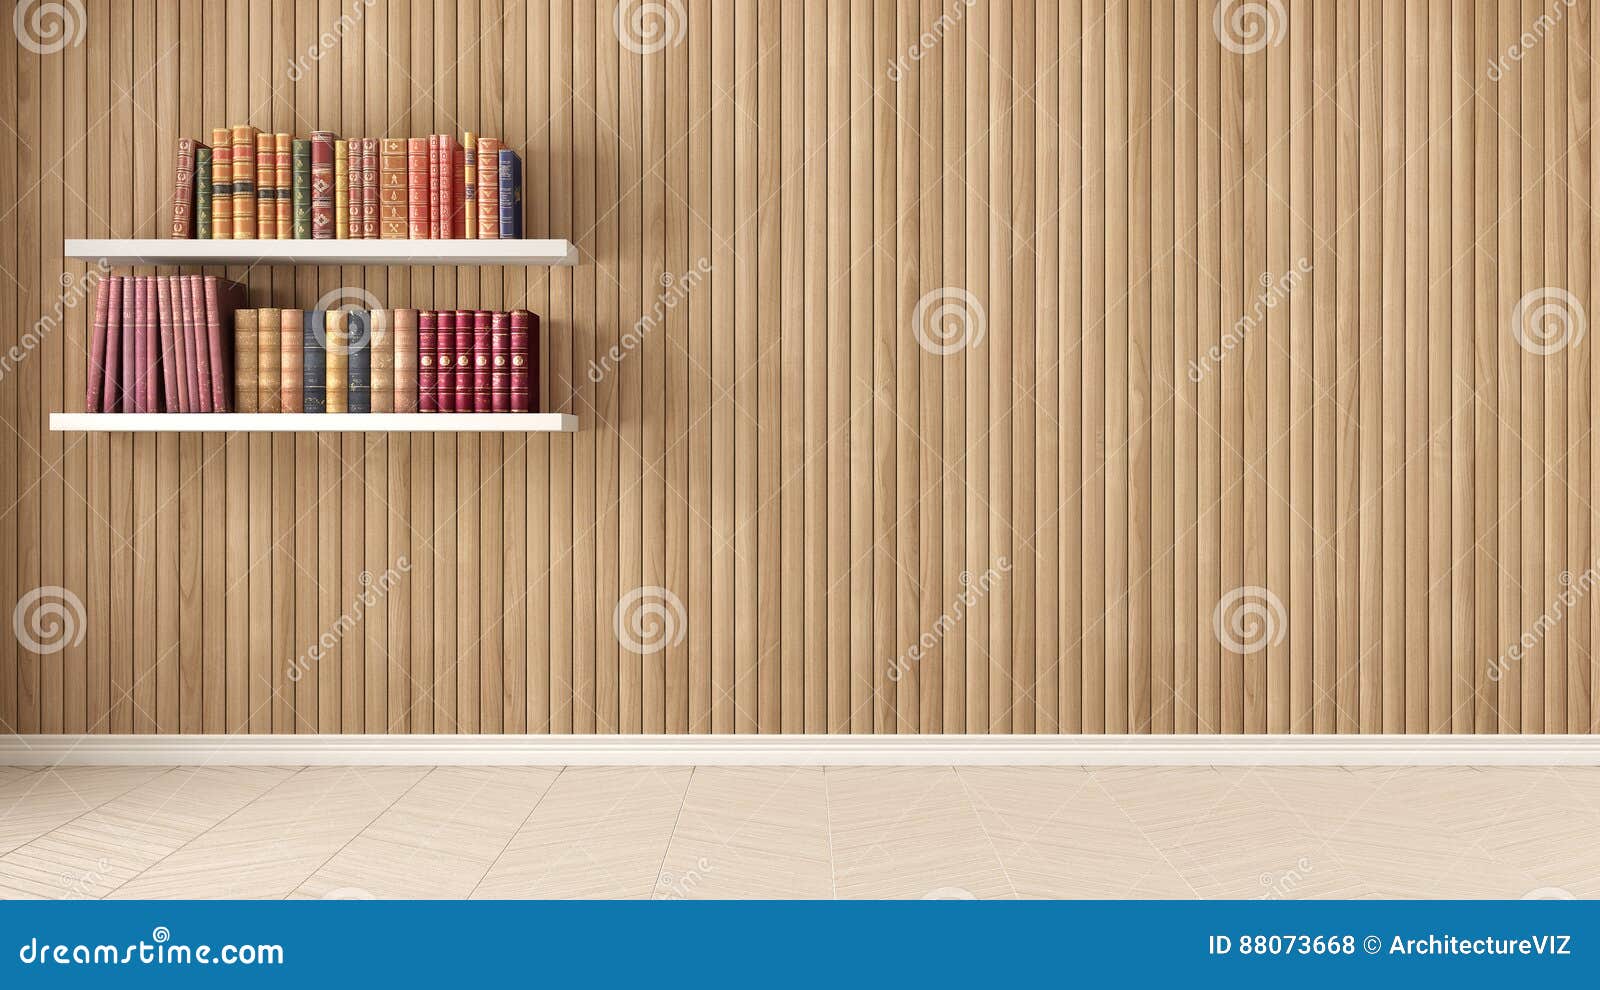 empty room, shelves with old books, herringbone parquet and wood